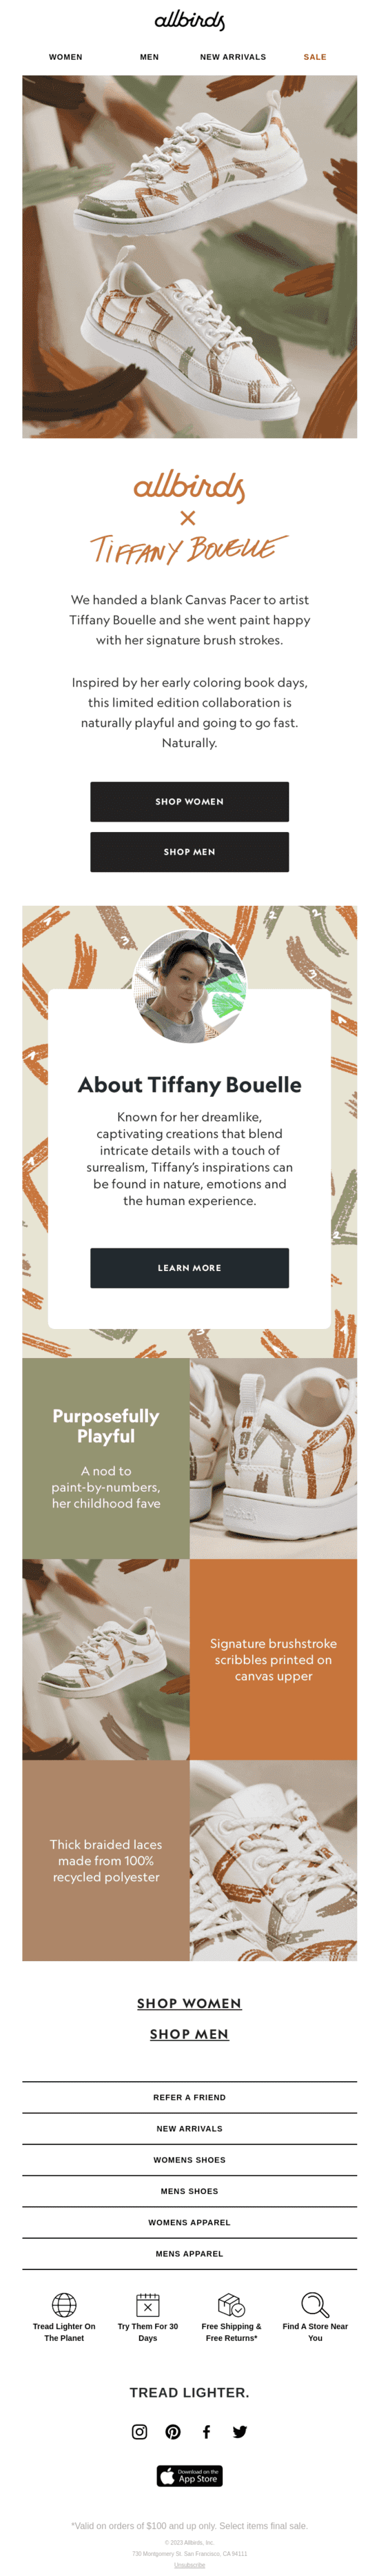 An email promoting the Allbirds collaboration with an artist Tiffany Bouelle and showcasing the limited edition footwear